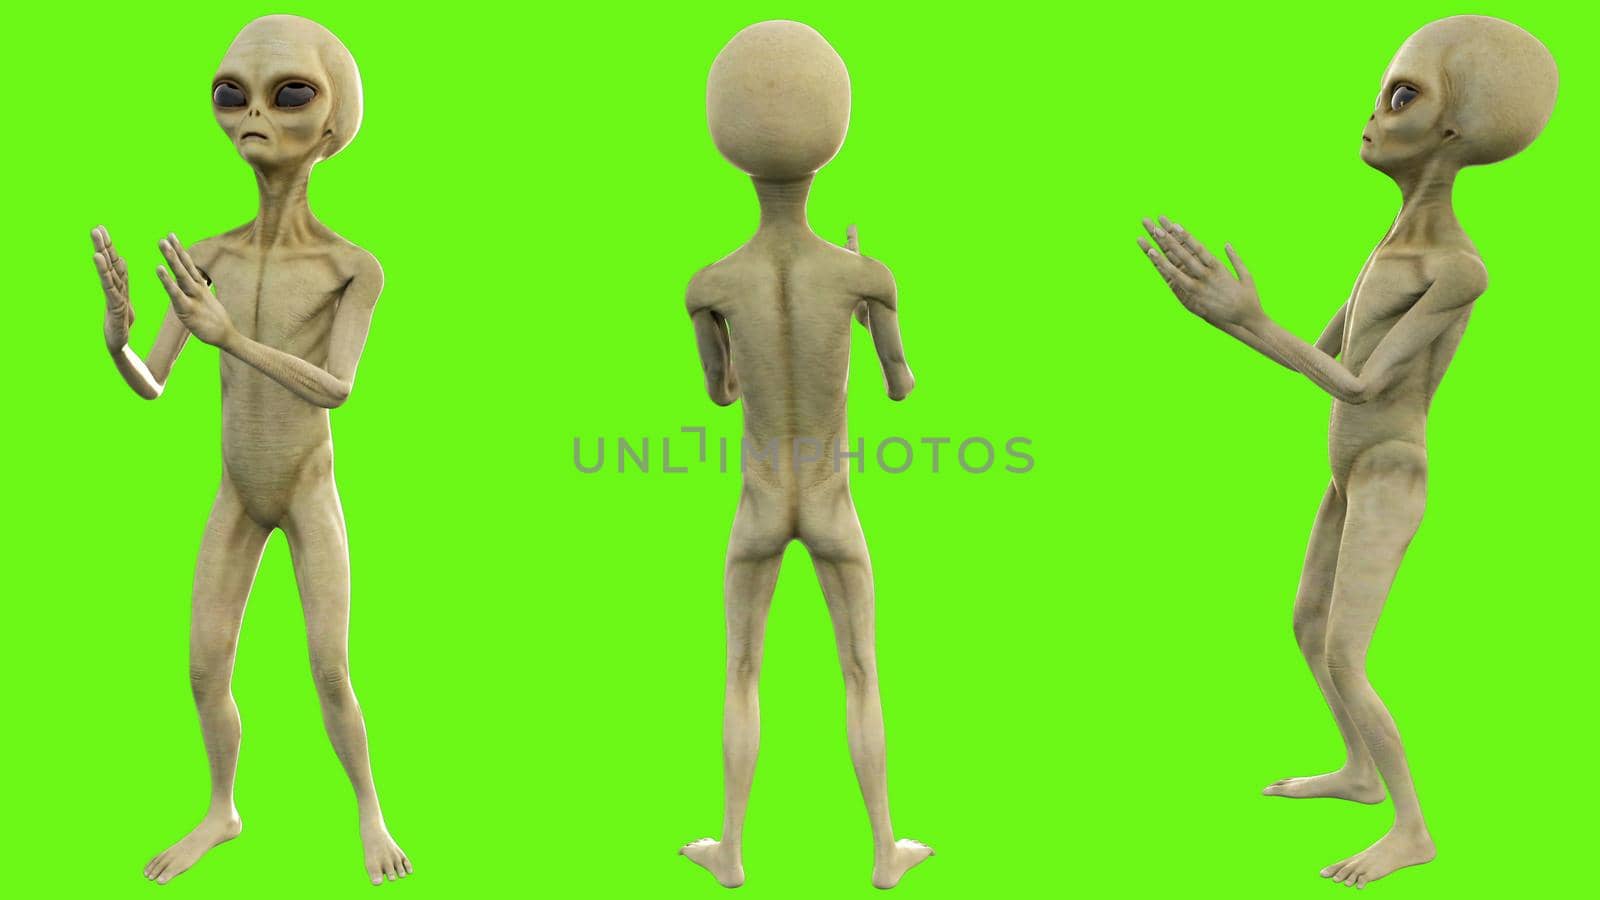 Alien clapping on green screen. 3D rendering by designprojects